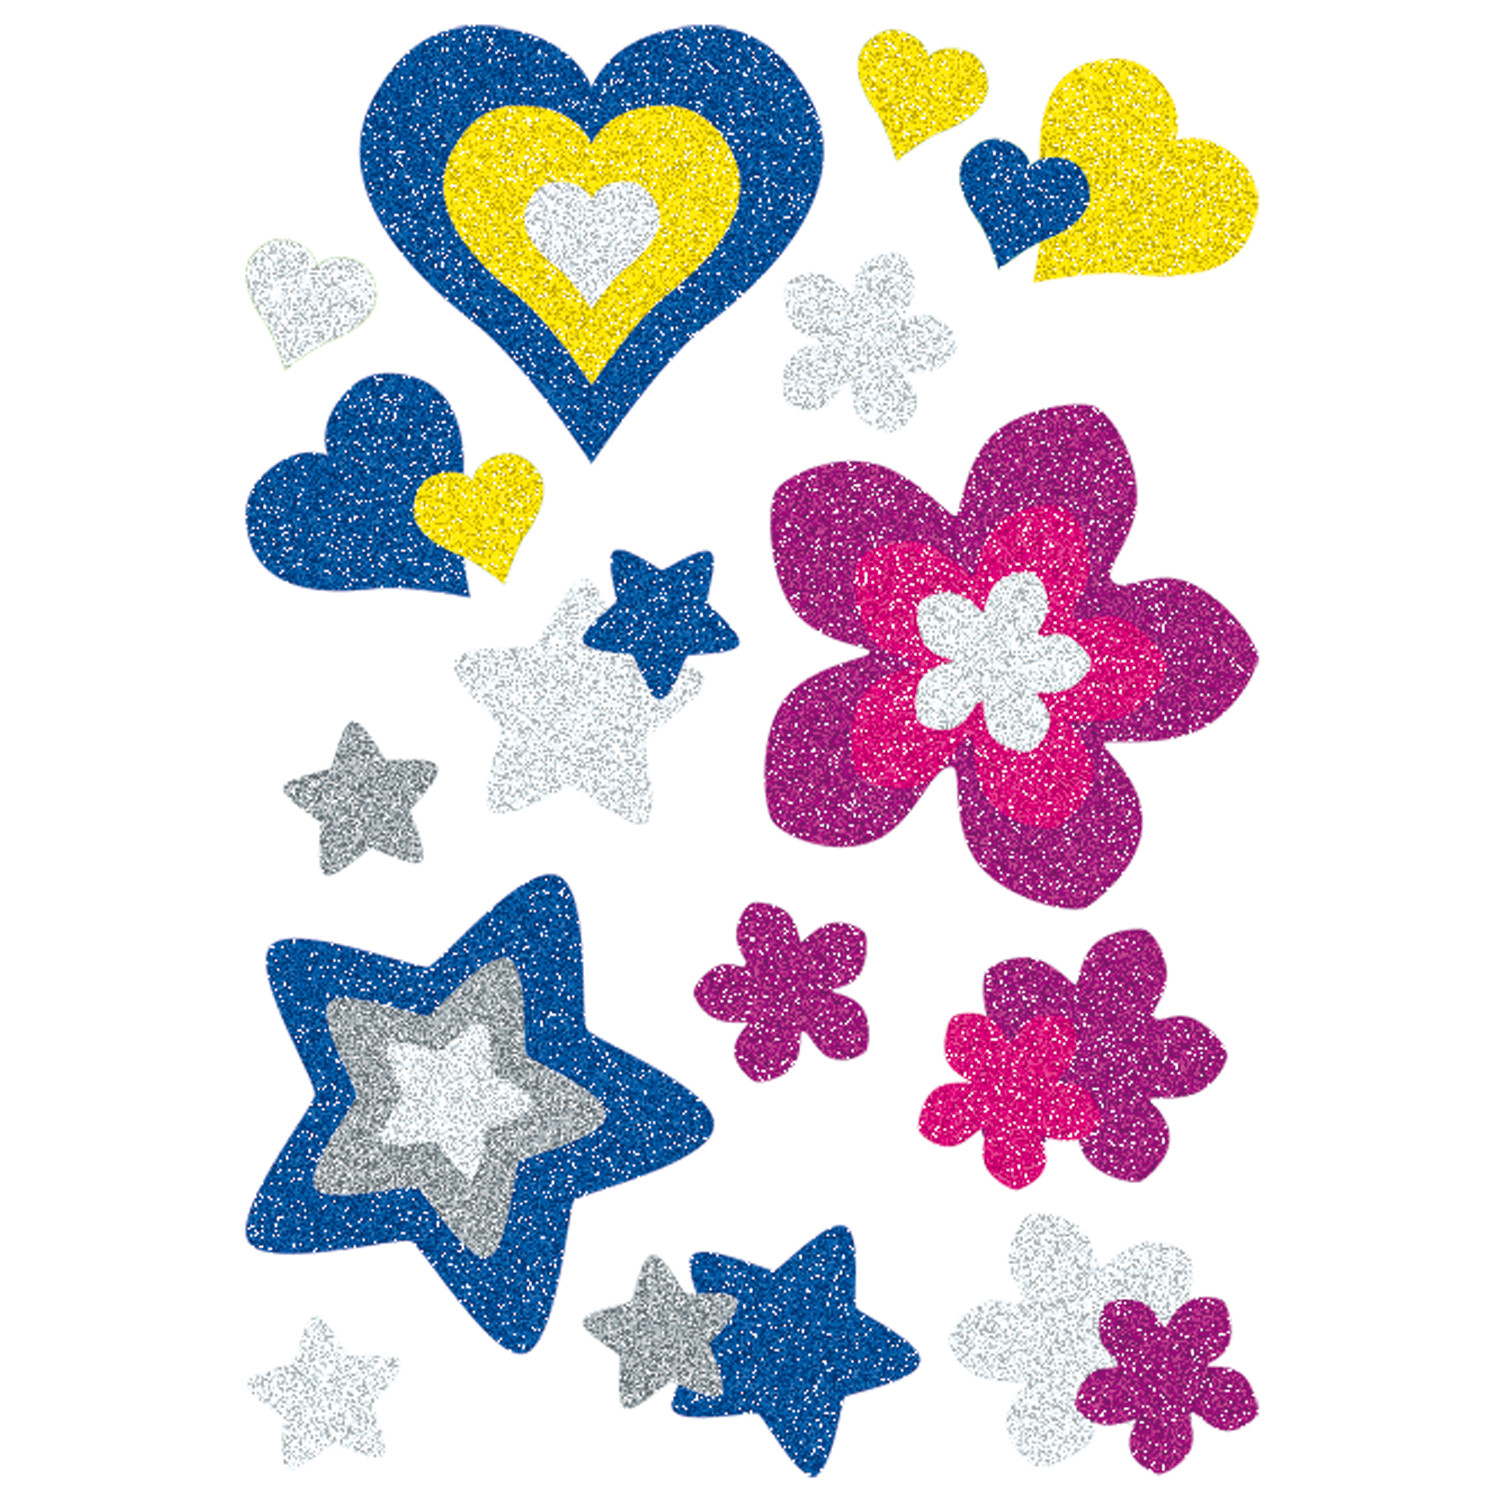 Free Images Of Hearts And Stars, Download Free Clip Art, Free Clip.